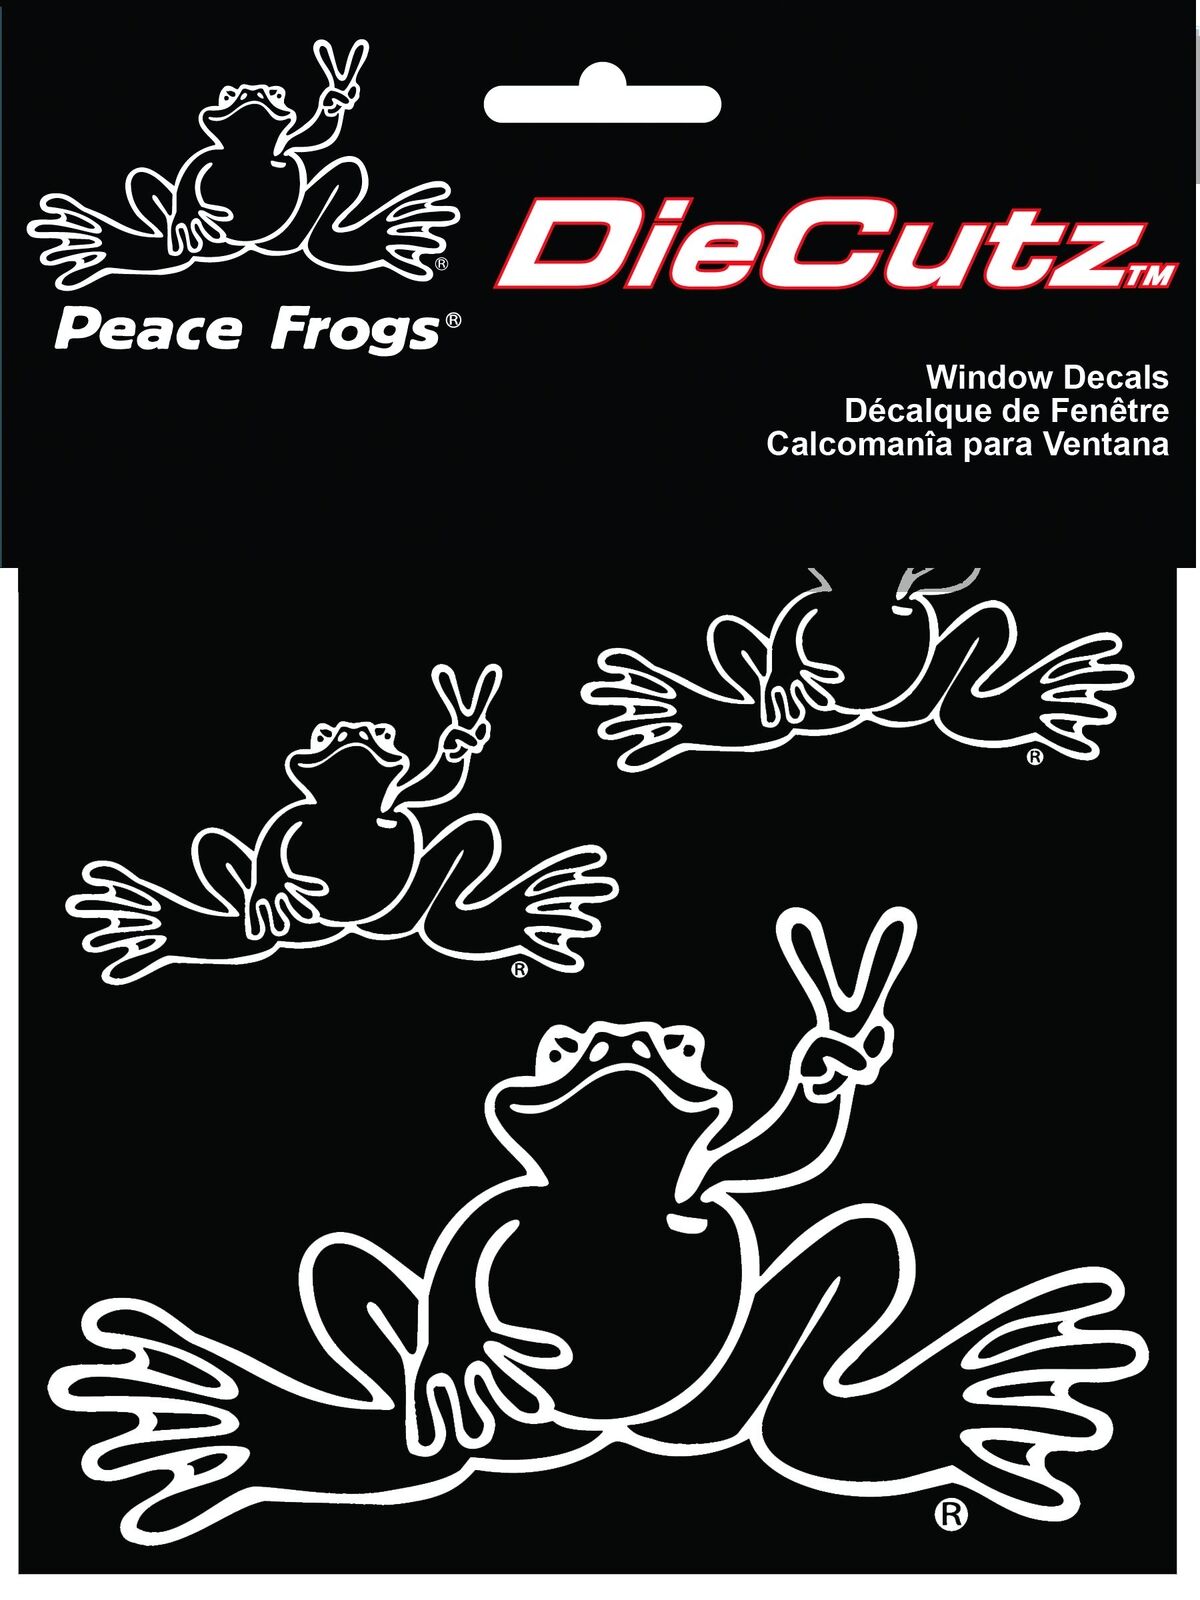 Chroma 003928 Die Cutz \'Peace Frog\' Decal